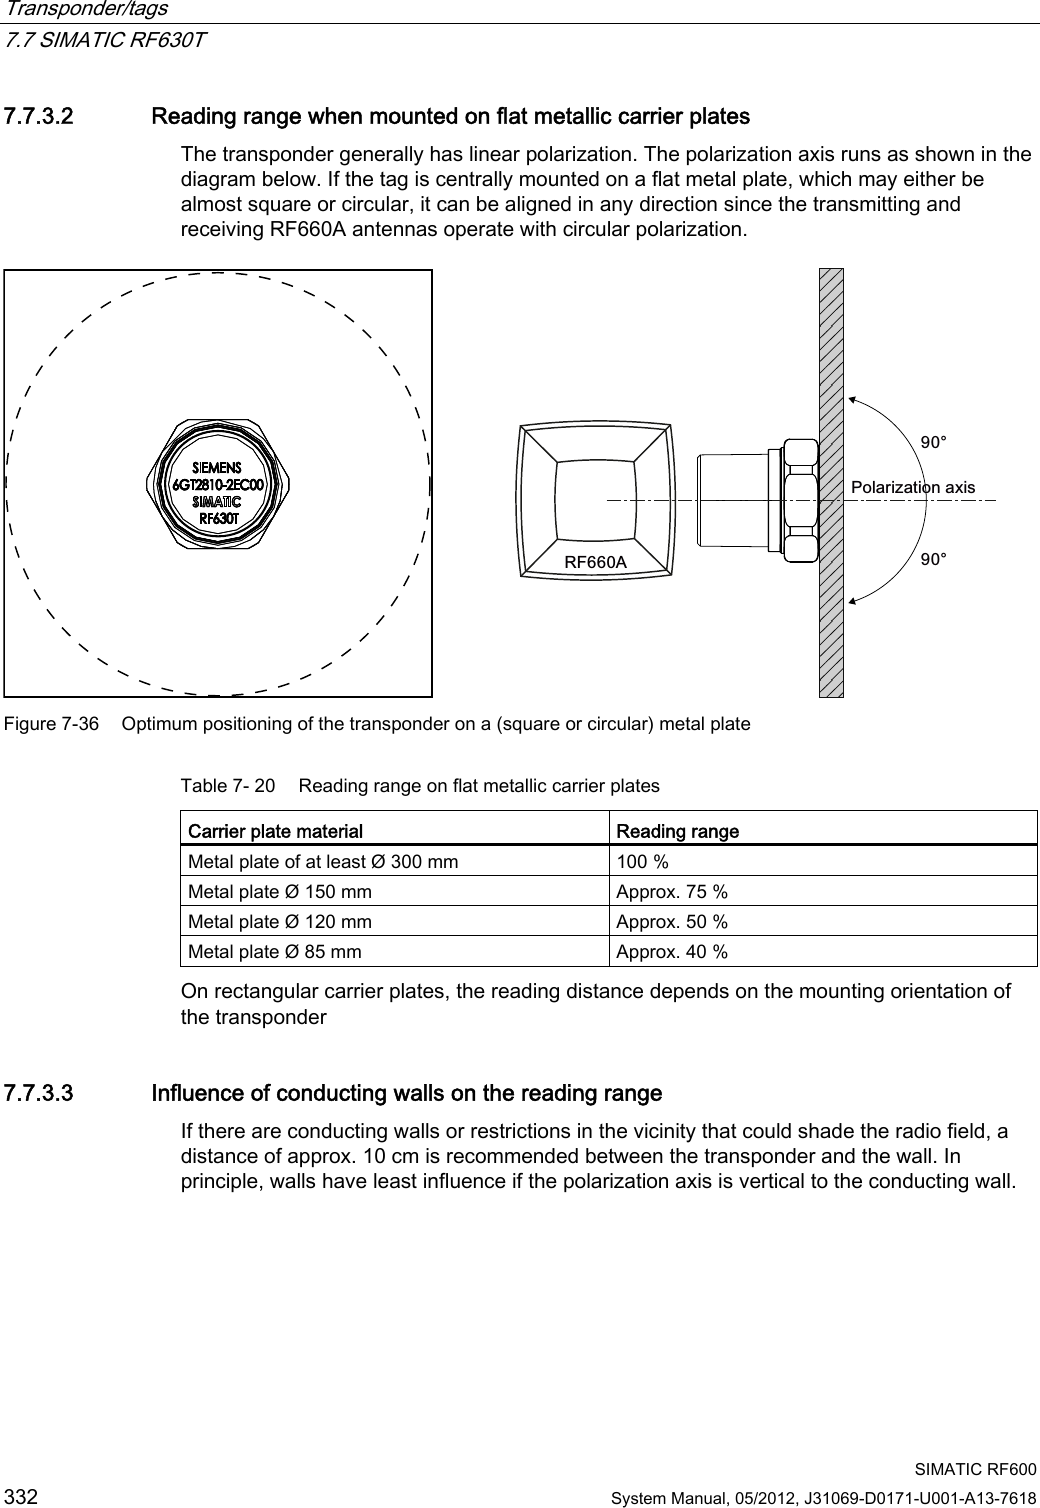 Transponder/tags   7.7 SIMATIC RF630T  SIMATIC RF600 332 System Manual, 05/2012, J31069-D0171-U001-A13-7618 7.7.3.2 Reading range when mounted on flat metallic carrier plates The transponder generally has linear polarization. The polarization axis runs as shown in the diagram below. If the tag is centrally mounted on a flat metal plate, which may either be almost square or circular, it can be aligned in any direction since the transmitting and receiving RF660A antennas operate with circular polarization. 3RODUL]DWLRQD[LVrr5)$ Figure 7-36  Optimum positioning of the transponder on a (square or circular) metal plate Table 7- 20  Reading range on flat metallic carrier plates Carrier plate material  Reading range Metal plate of at least Ø 300 mm  100 % Metal plate Ø 150 mm  Approx. 75 % Metal plate Ø 120 mm  Approx. 50 % Metal plate Ø 85 mm  Approx. 40 % On rectangular carrier plates, the reading distance depends on the mounting orientation of the transponder 7.7.3.3 Influence of conducting walls on the reading range If there are conducting walls or restrictions in the vicinity that could shade the radio field, a distance of approx. 10 cm is recommended between the transponder and the wall. In principle, walls have least influence if the polarization axis is vertical to the conducting wall. 